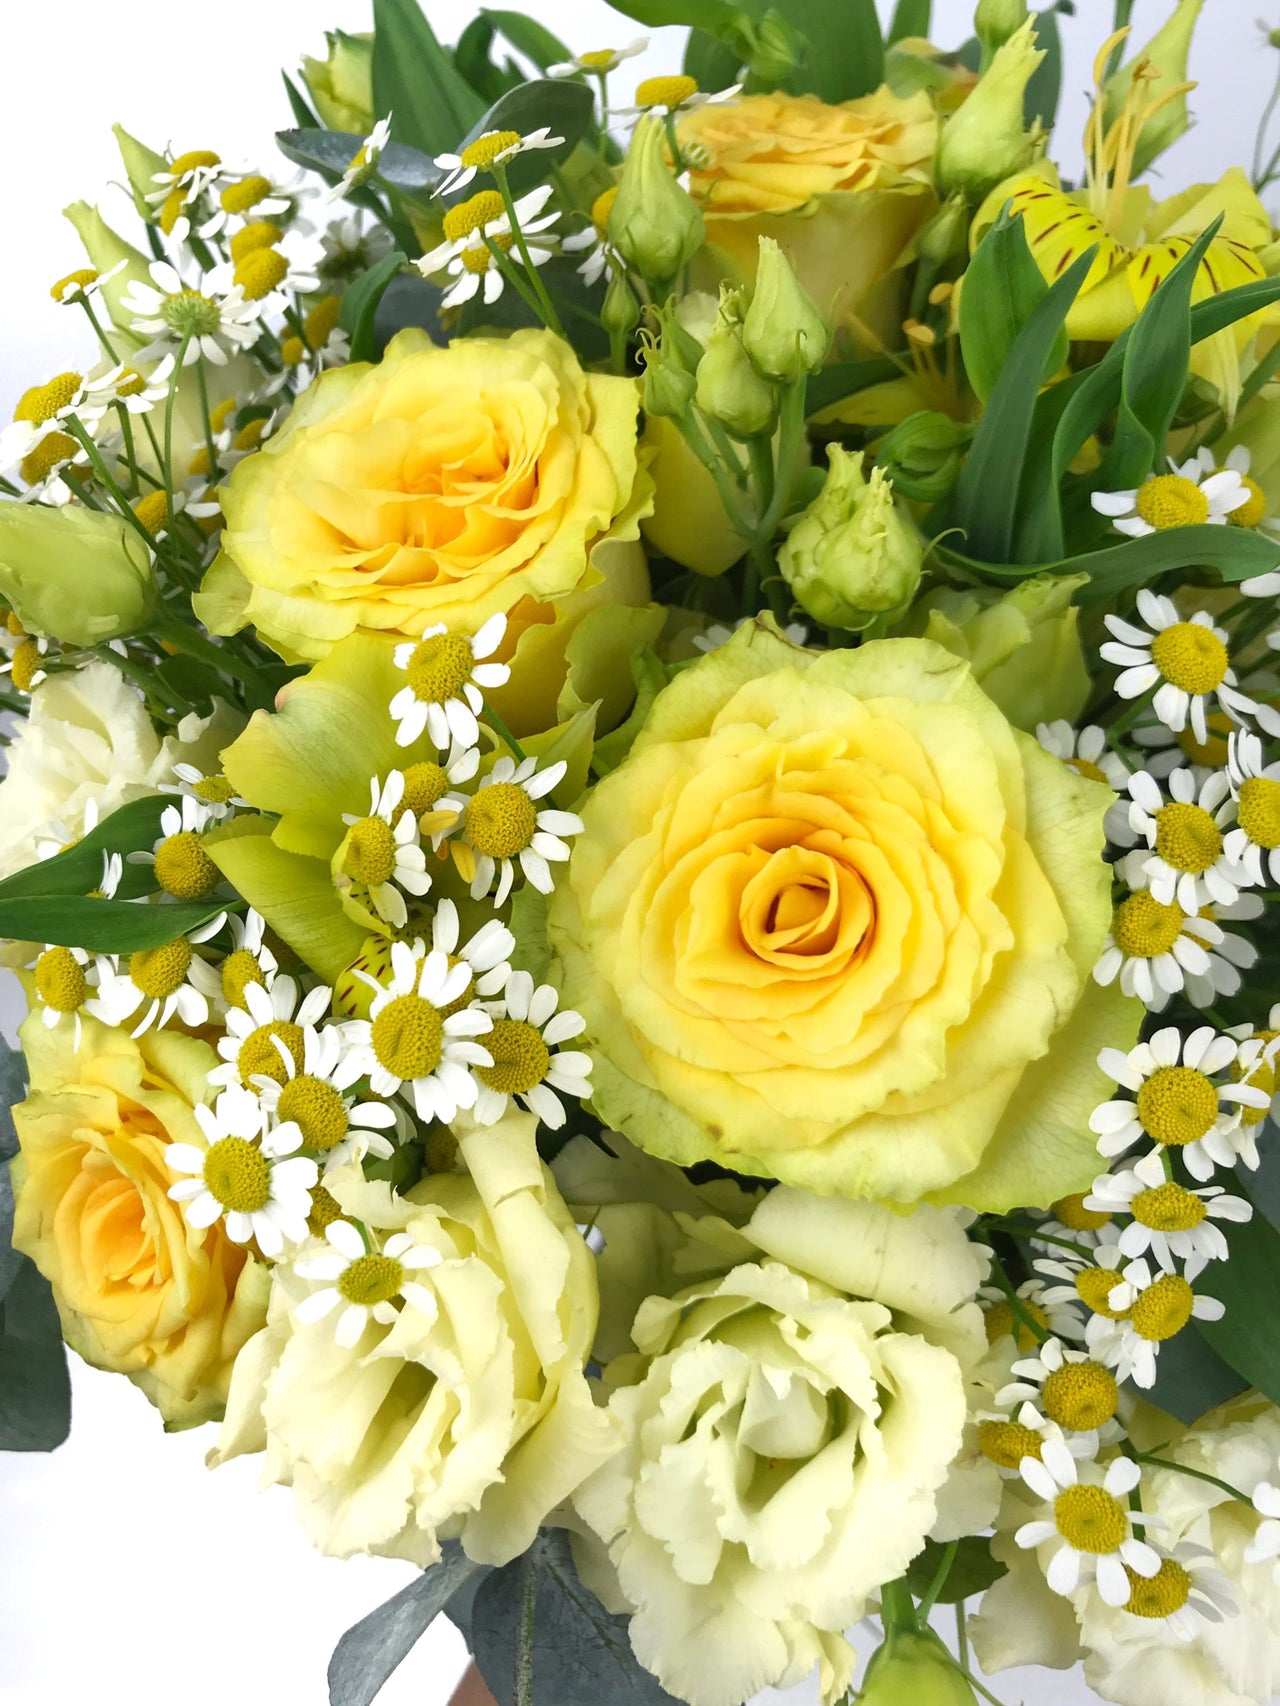 Sending a bouquet of yellow flowers - Large yellow 